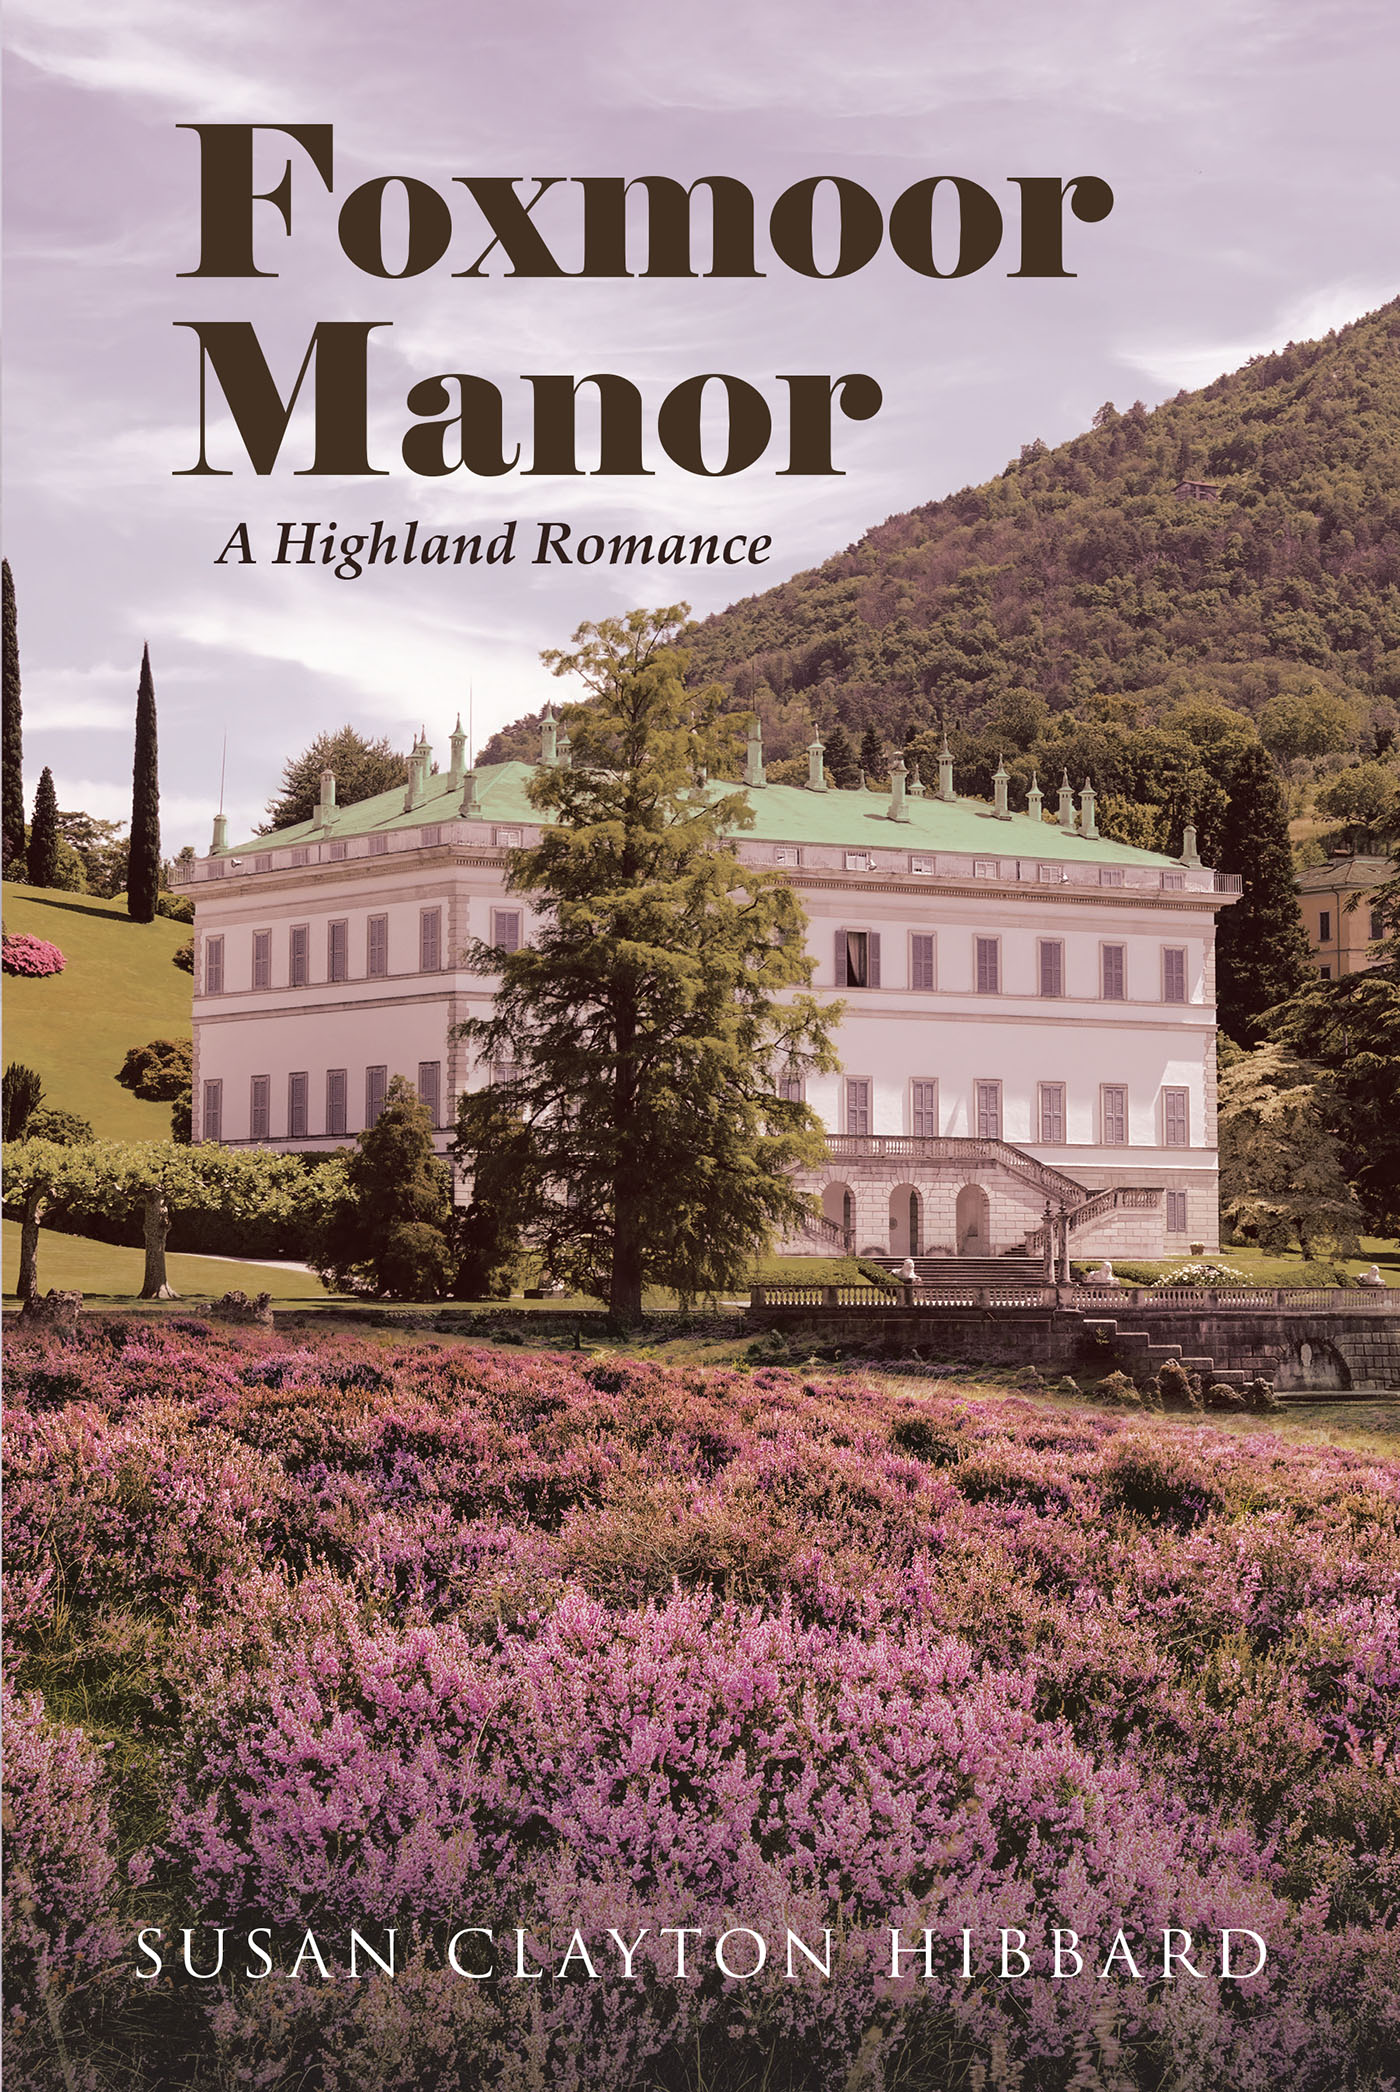 Author Susan Clayton Hibbard’s New Book, "Foxmoor Manor: A Highland Romance," is a Spellbinding Novel and an Otherworldly Love Story for the Ages